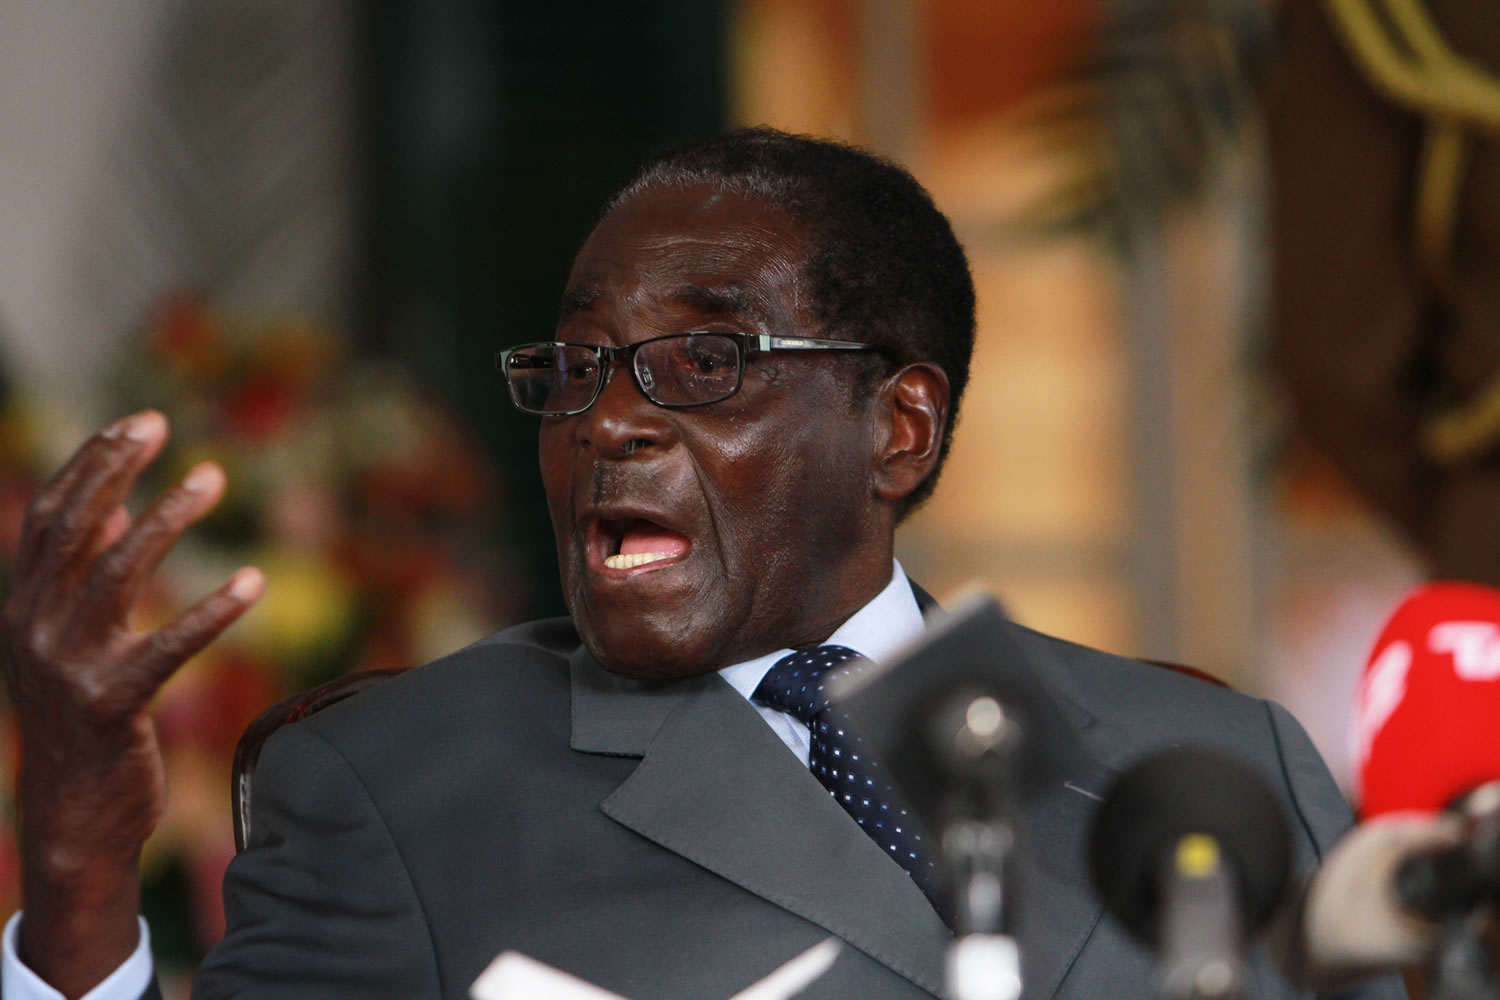 Zimbabwean President Robert Mugabe speaks during a press conference at State House in Harare on Tuesday.